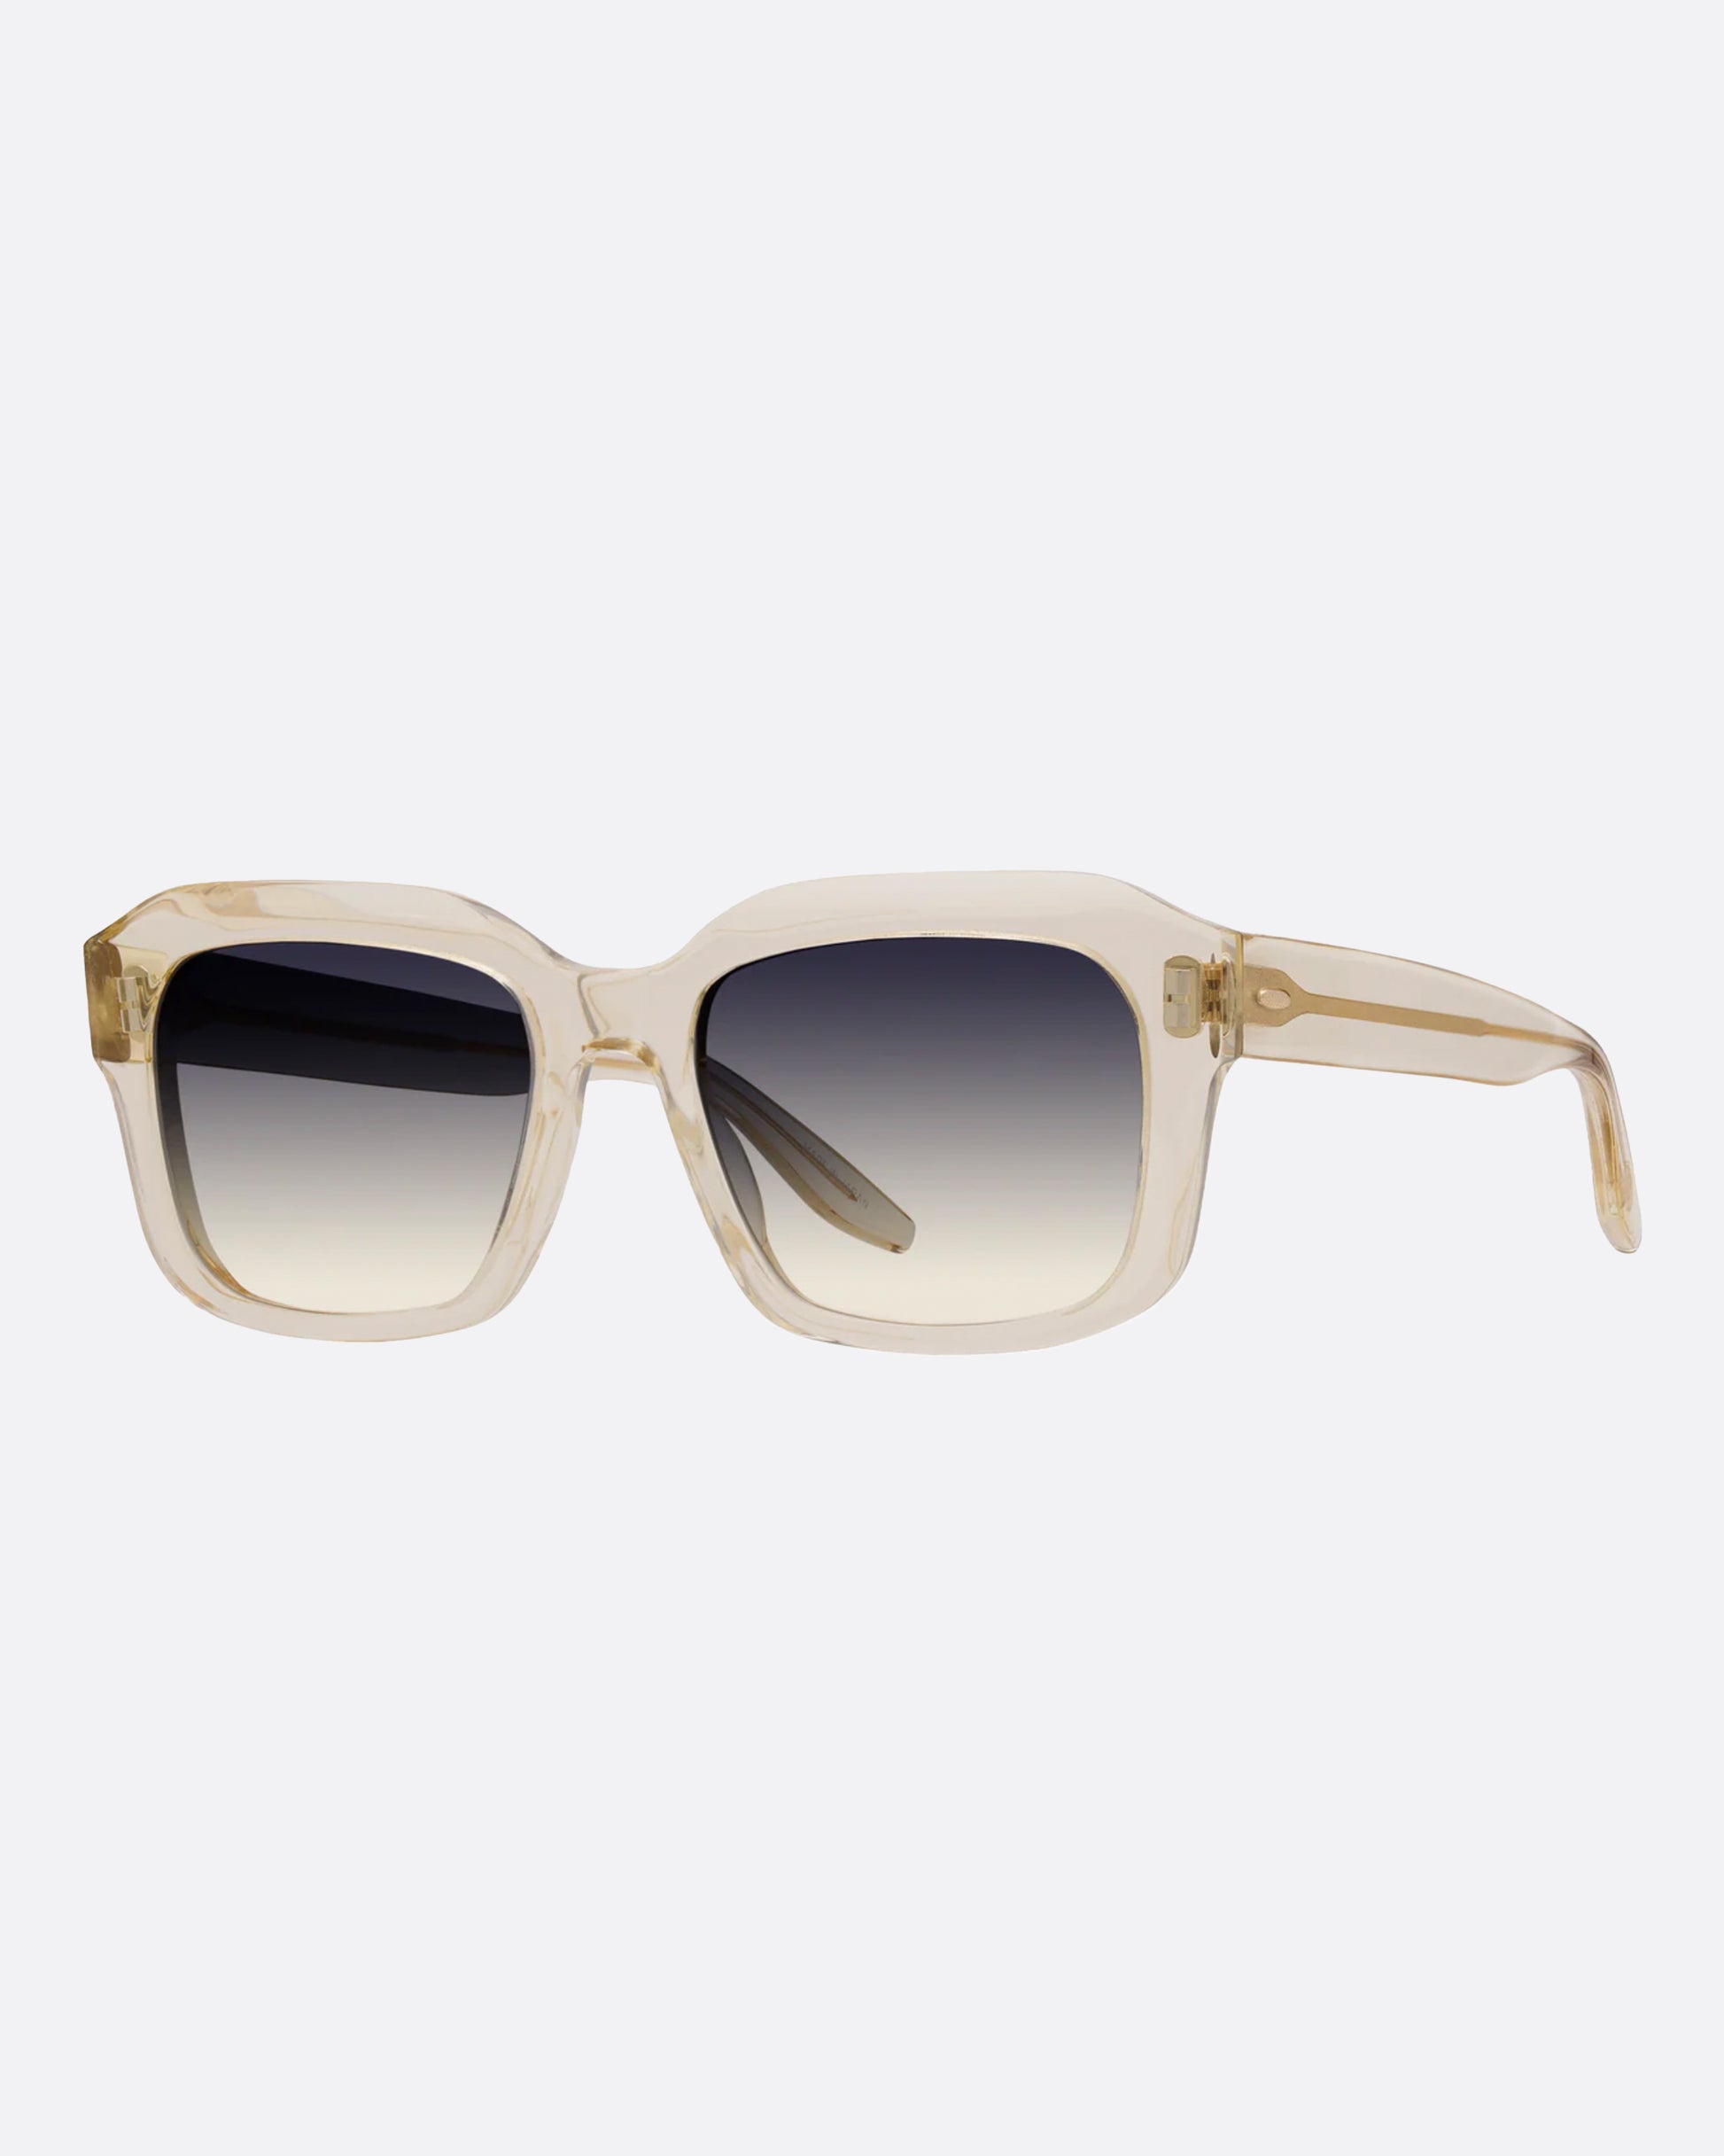 A pair of clear champagne acetate sunglasses with gray ombré lenses. Shown from the side.